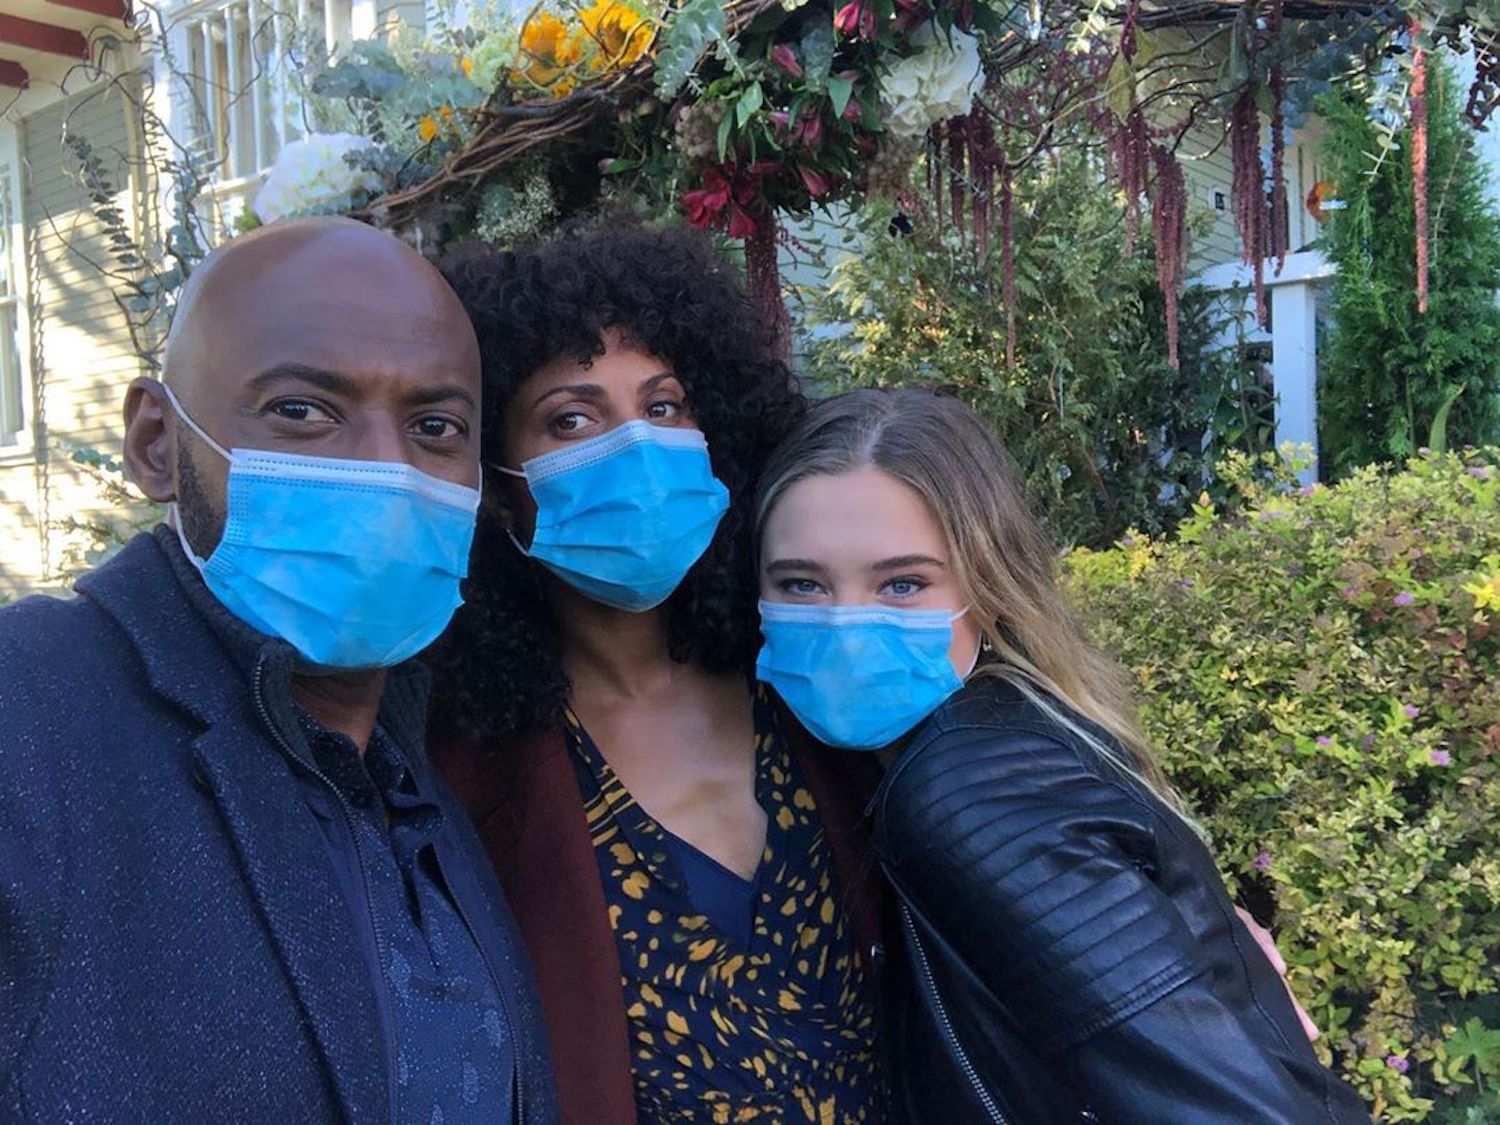 Romany Malco, Christina Moses, and Lizzy Greene on the A Million Little Things season 3 set